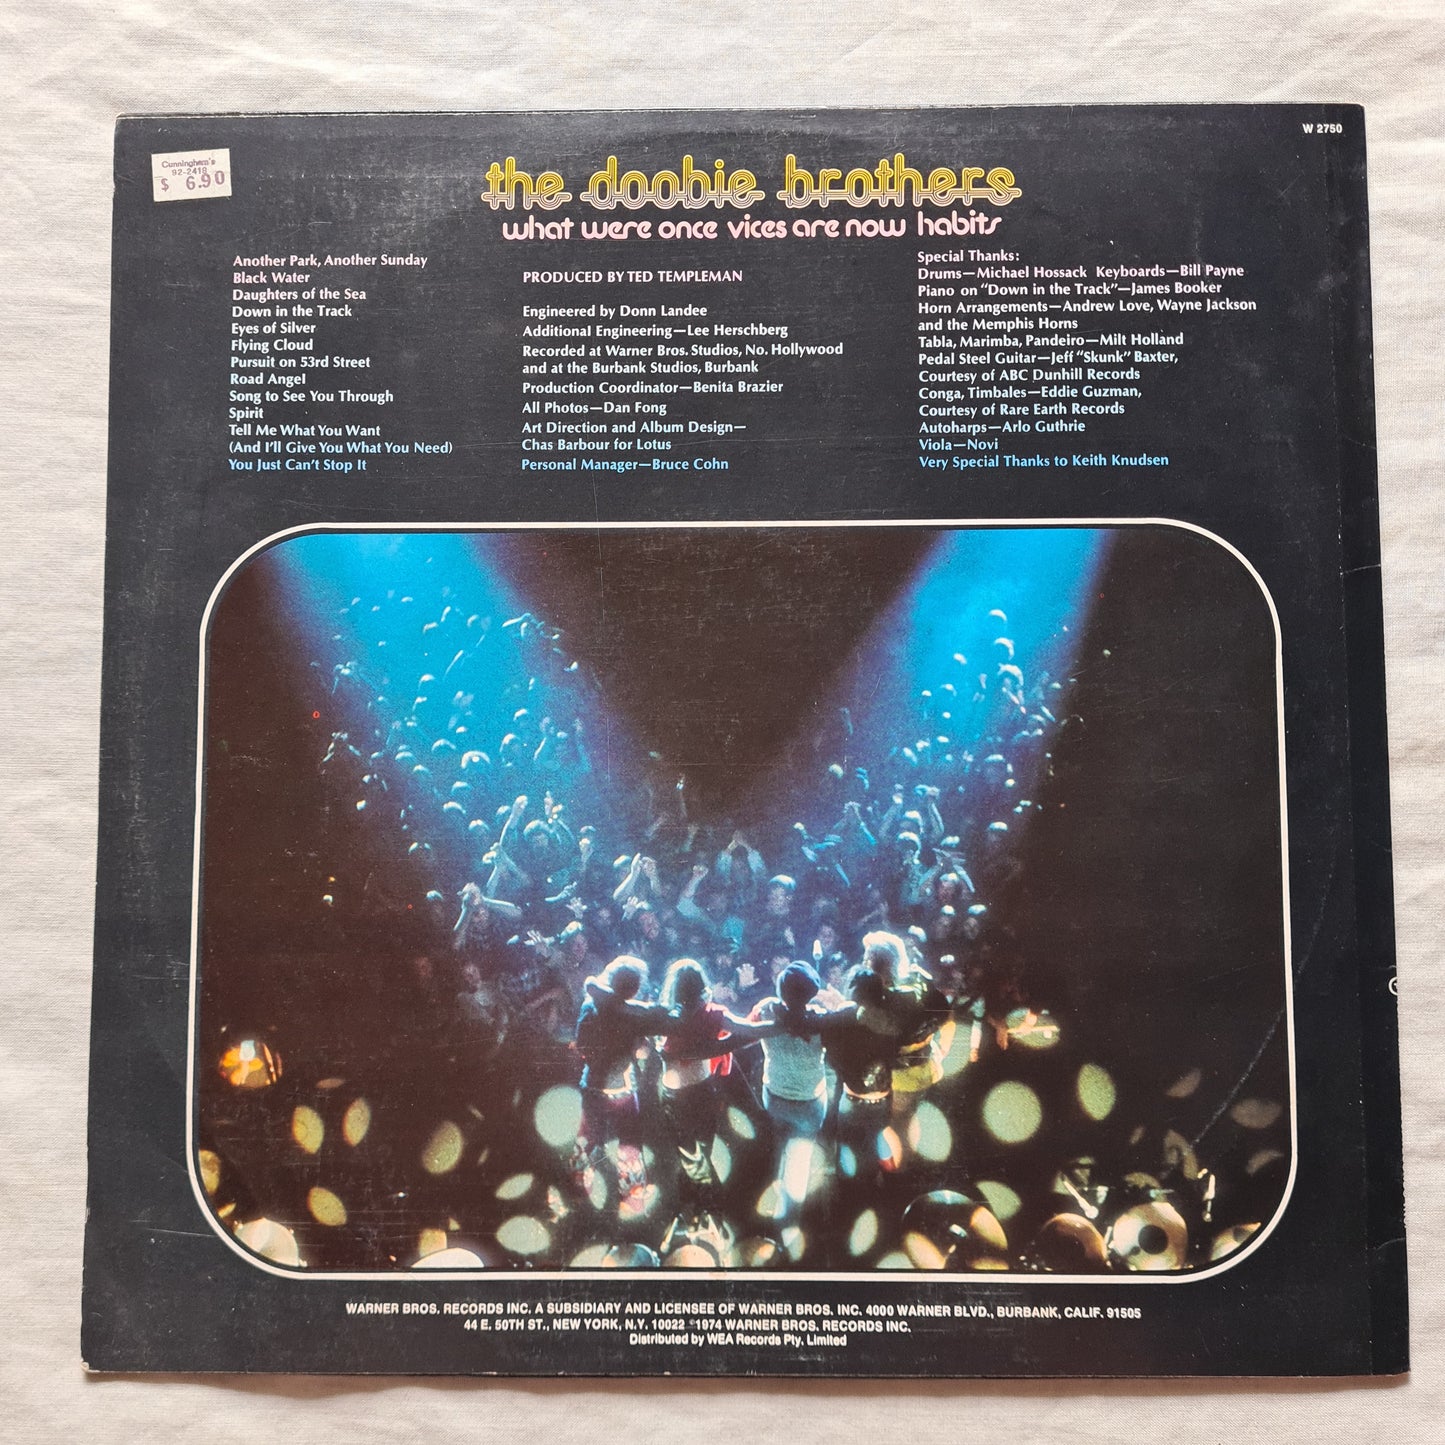 Doobie Brothers, The – What Once Were Habits Are Now Vices - 1974 - Vinyl Record